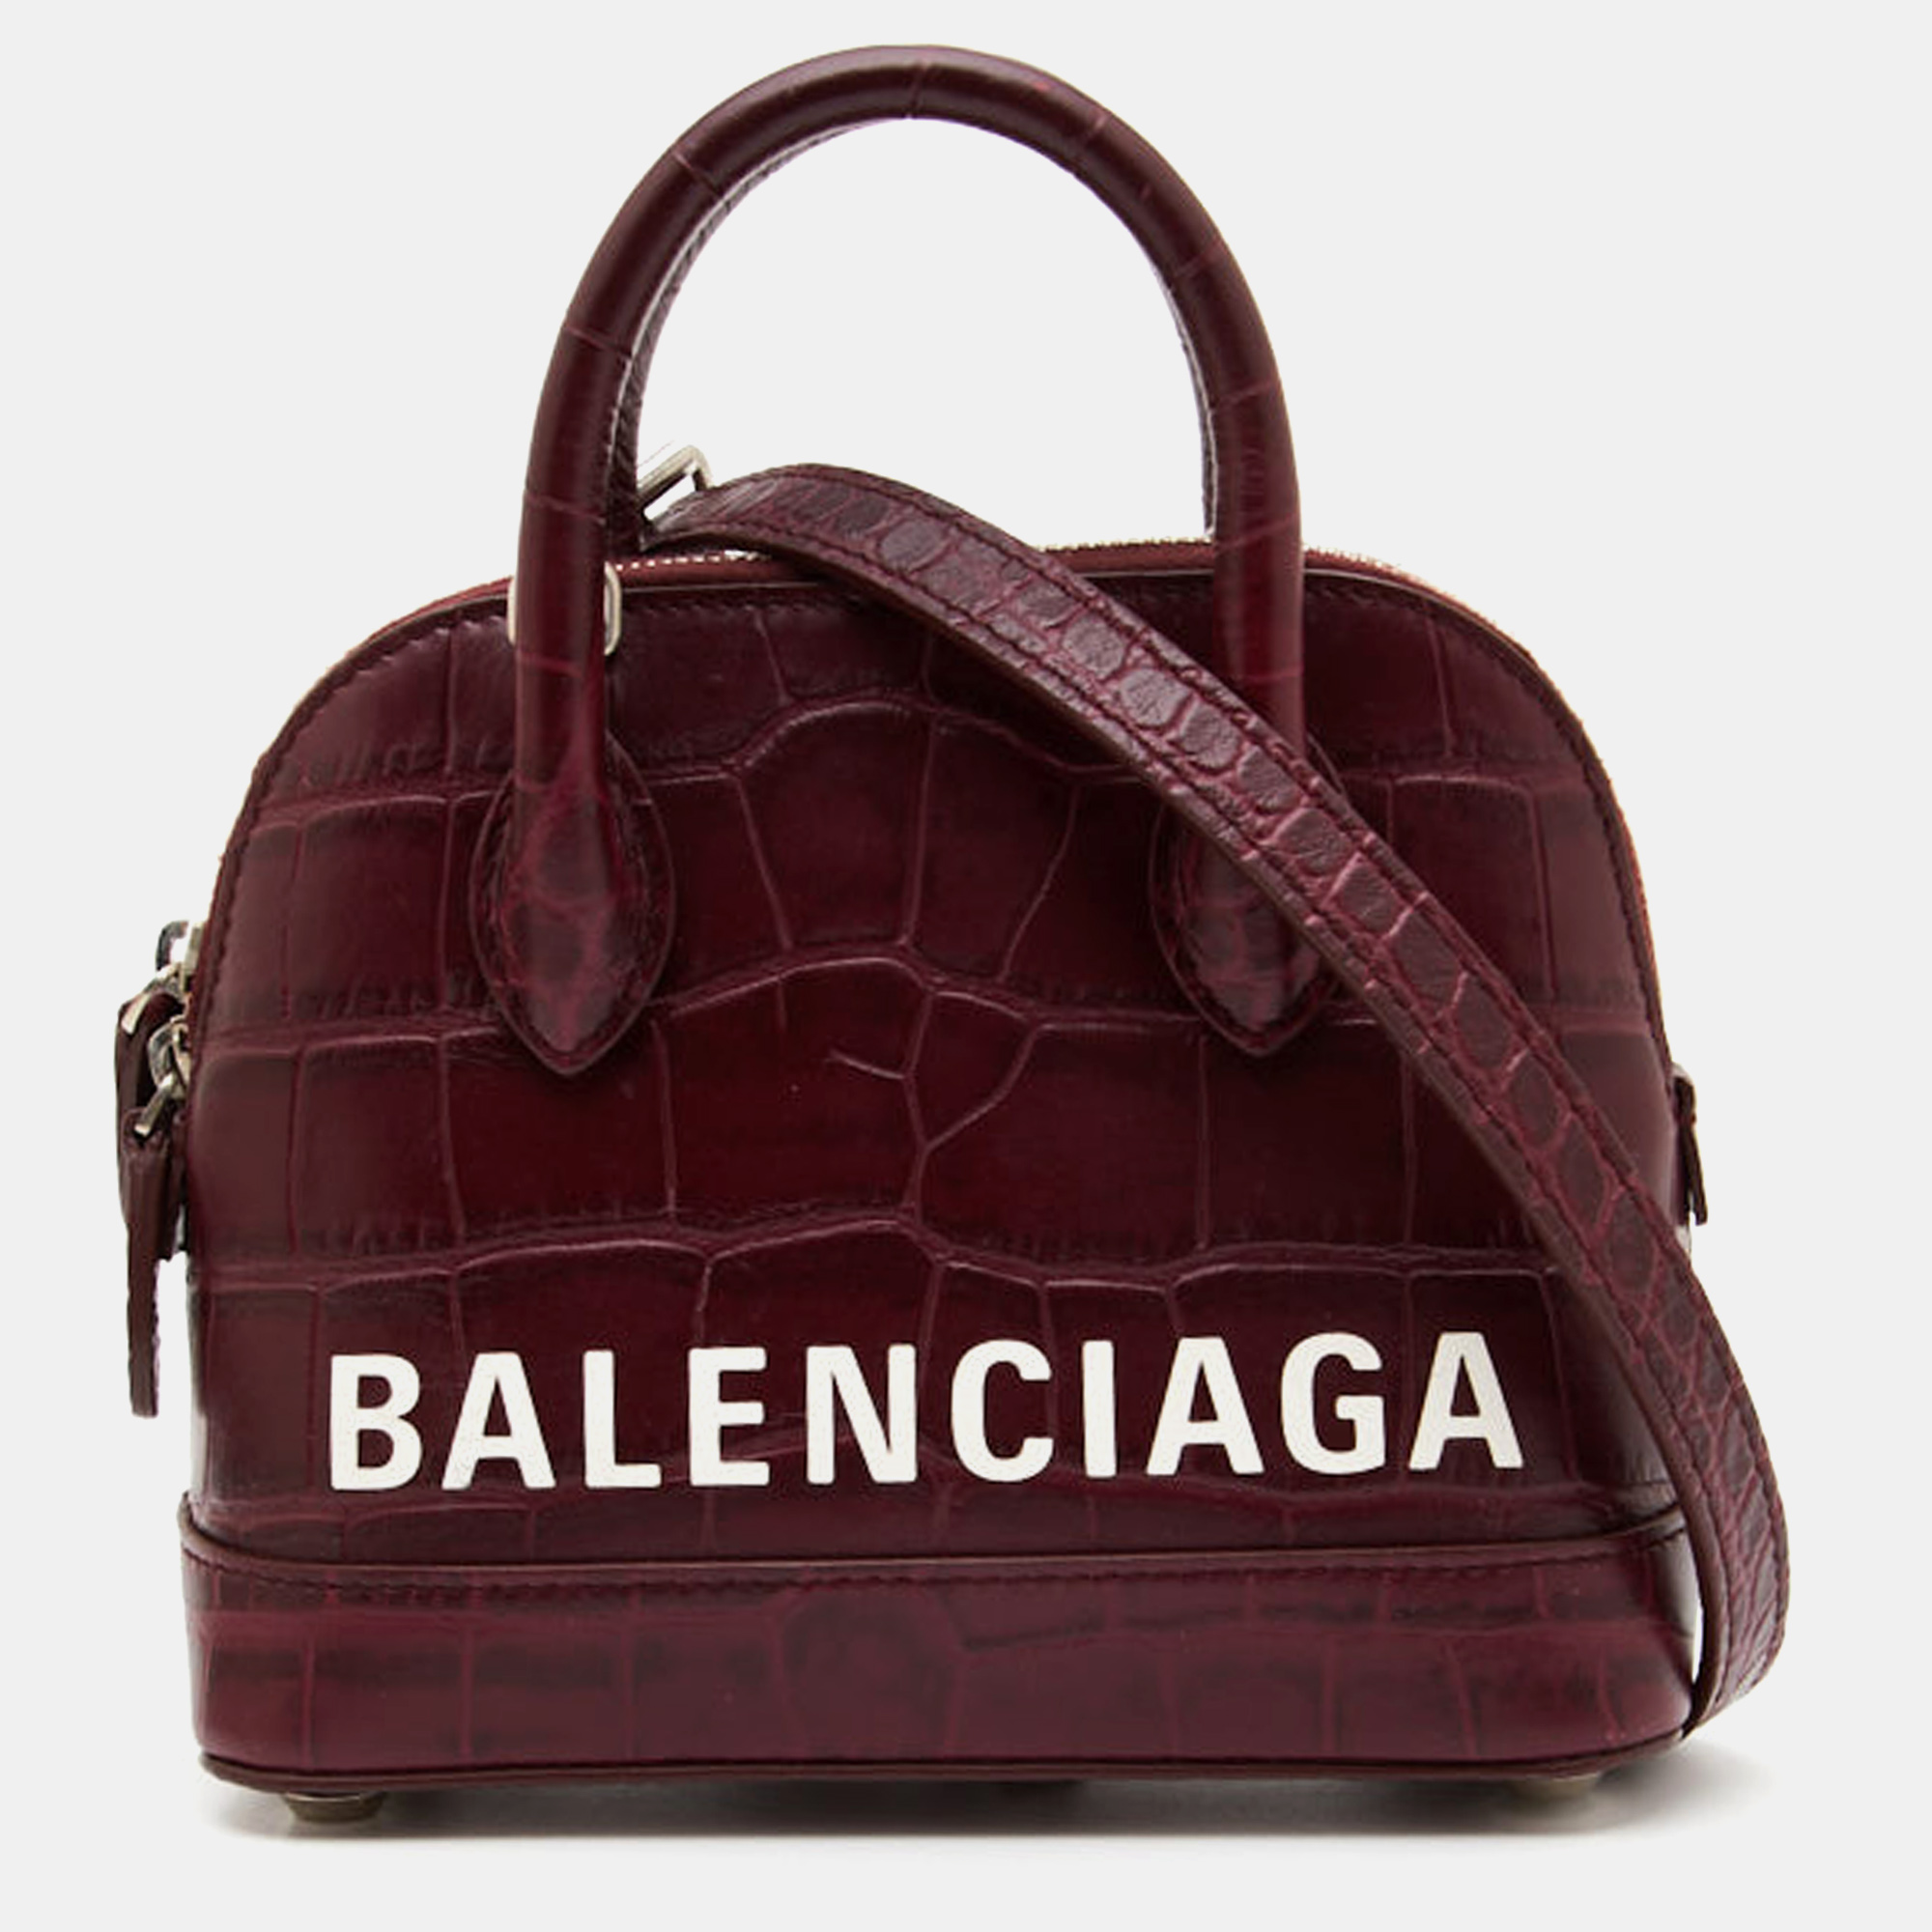 Pre-owned Balenciaga Burgundy Croc Embossed Leather Ville Satchel